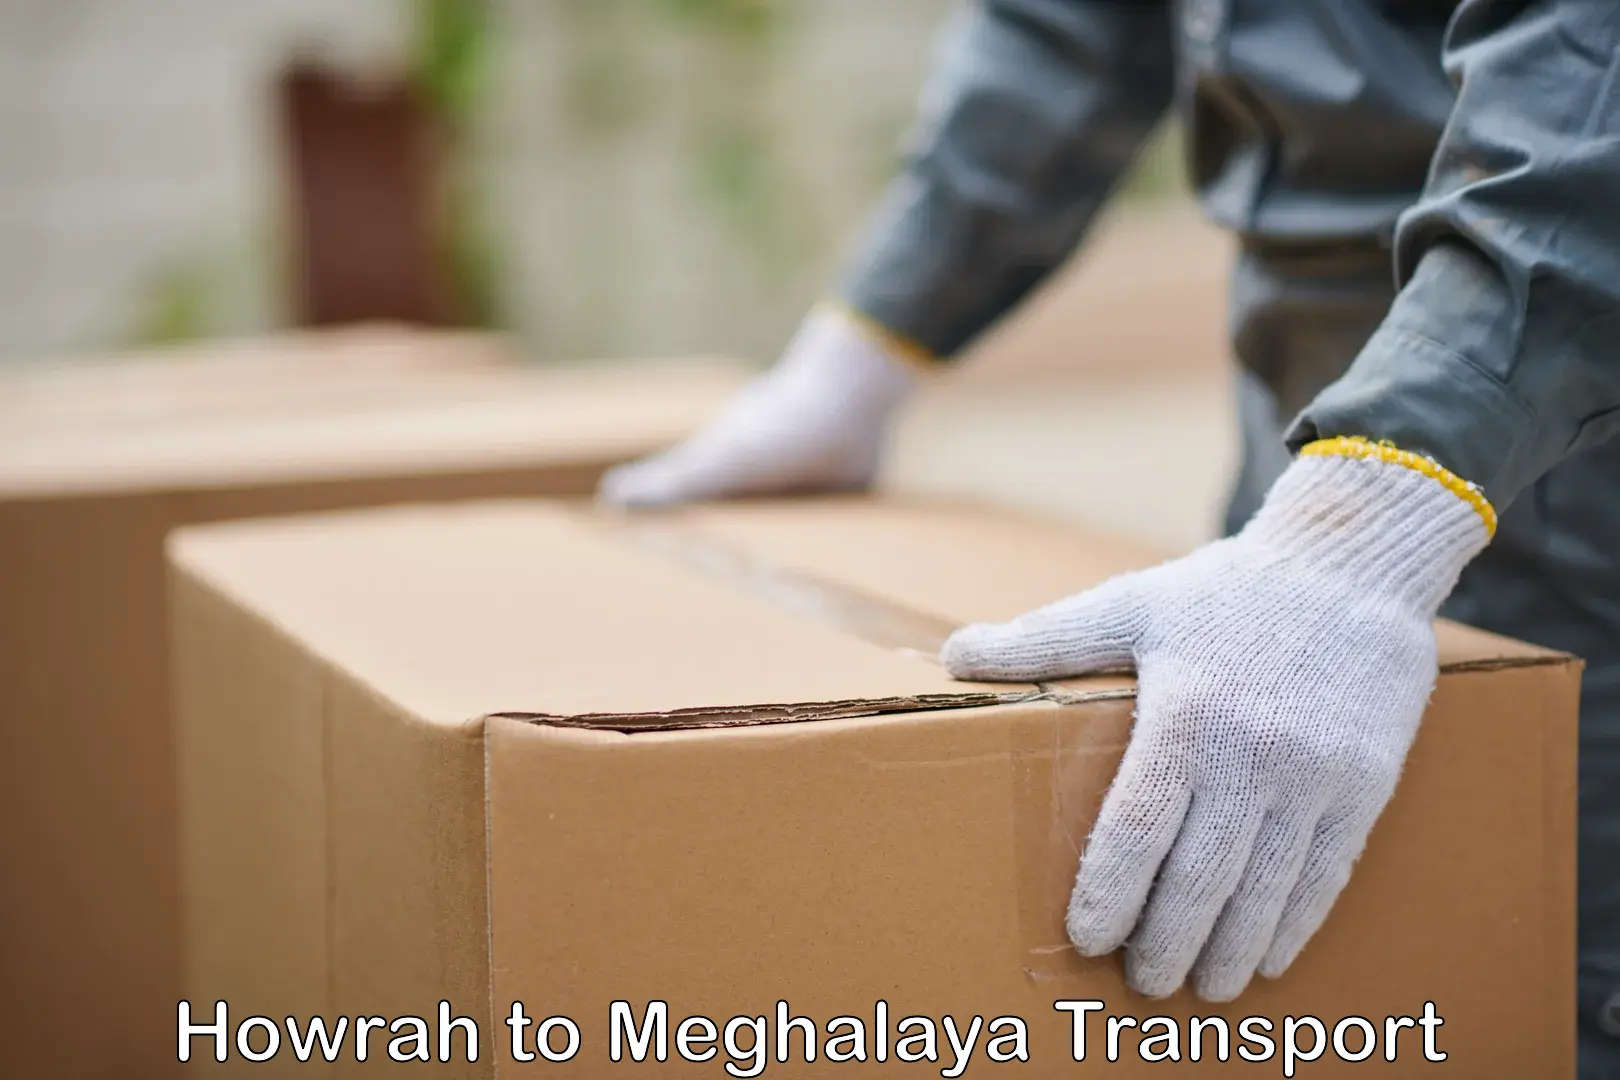 Container transport service Howrah to Meghalaya